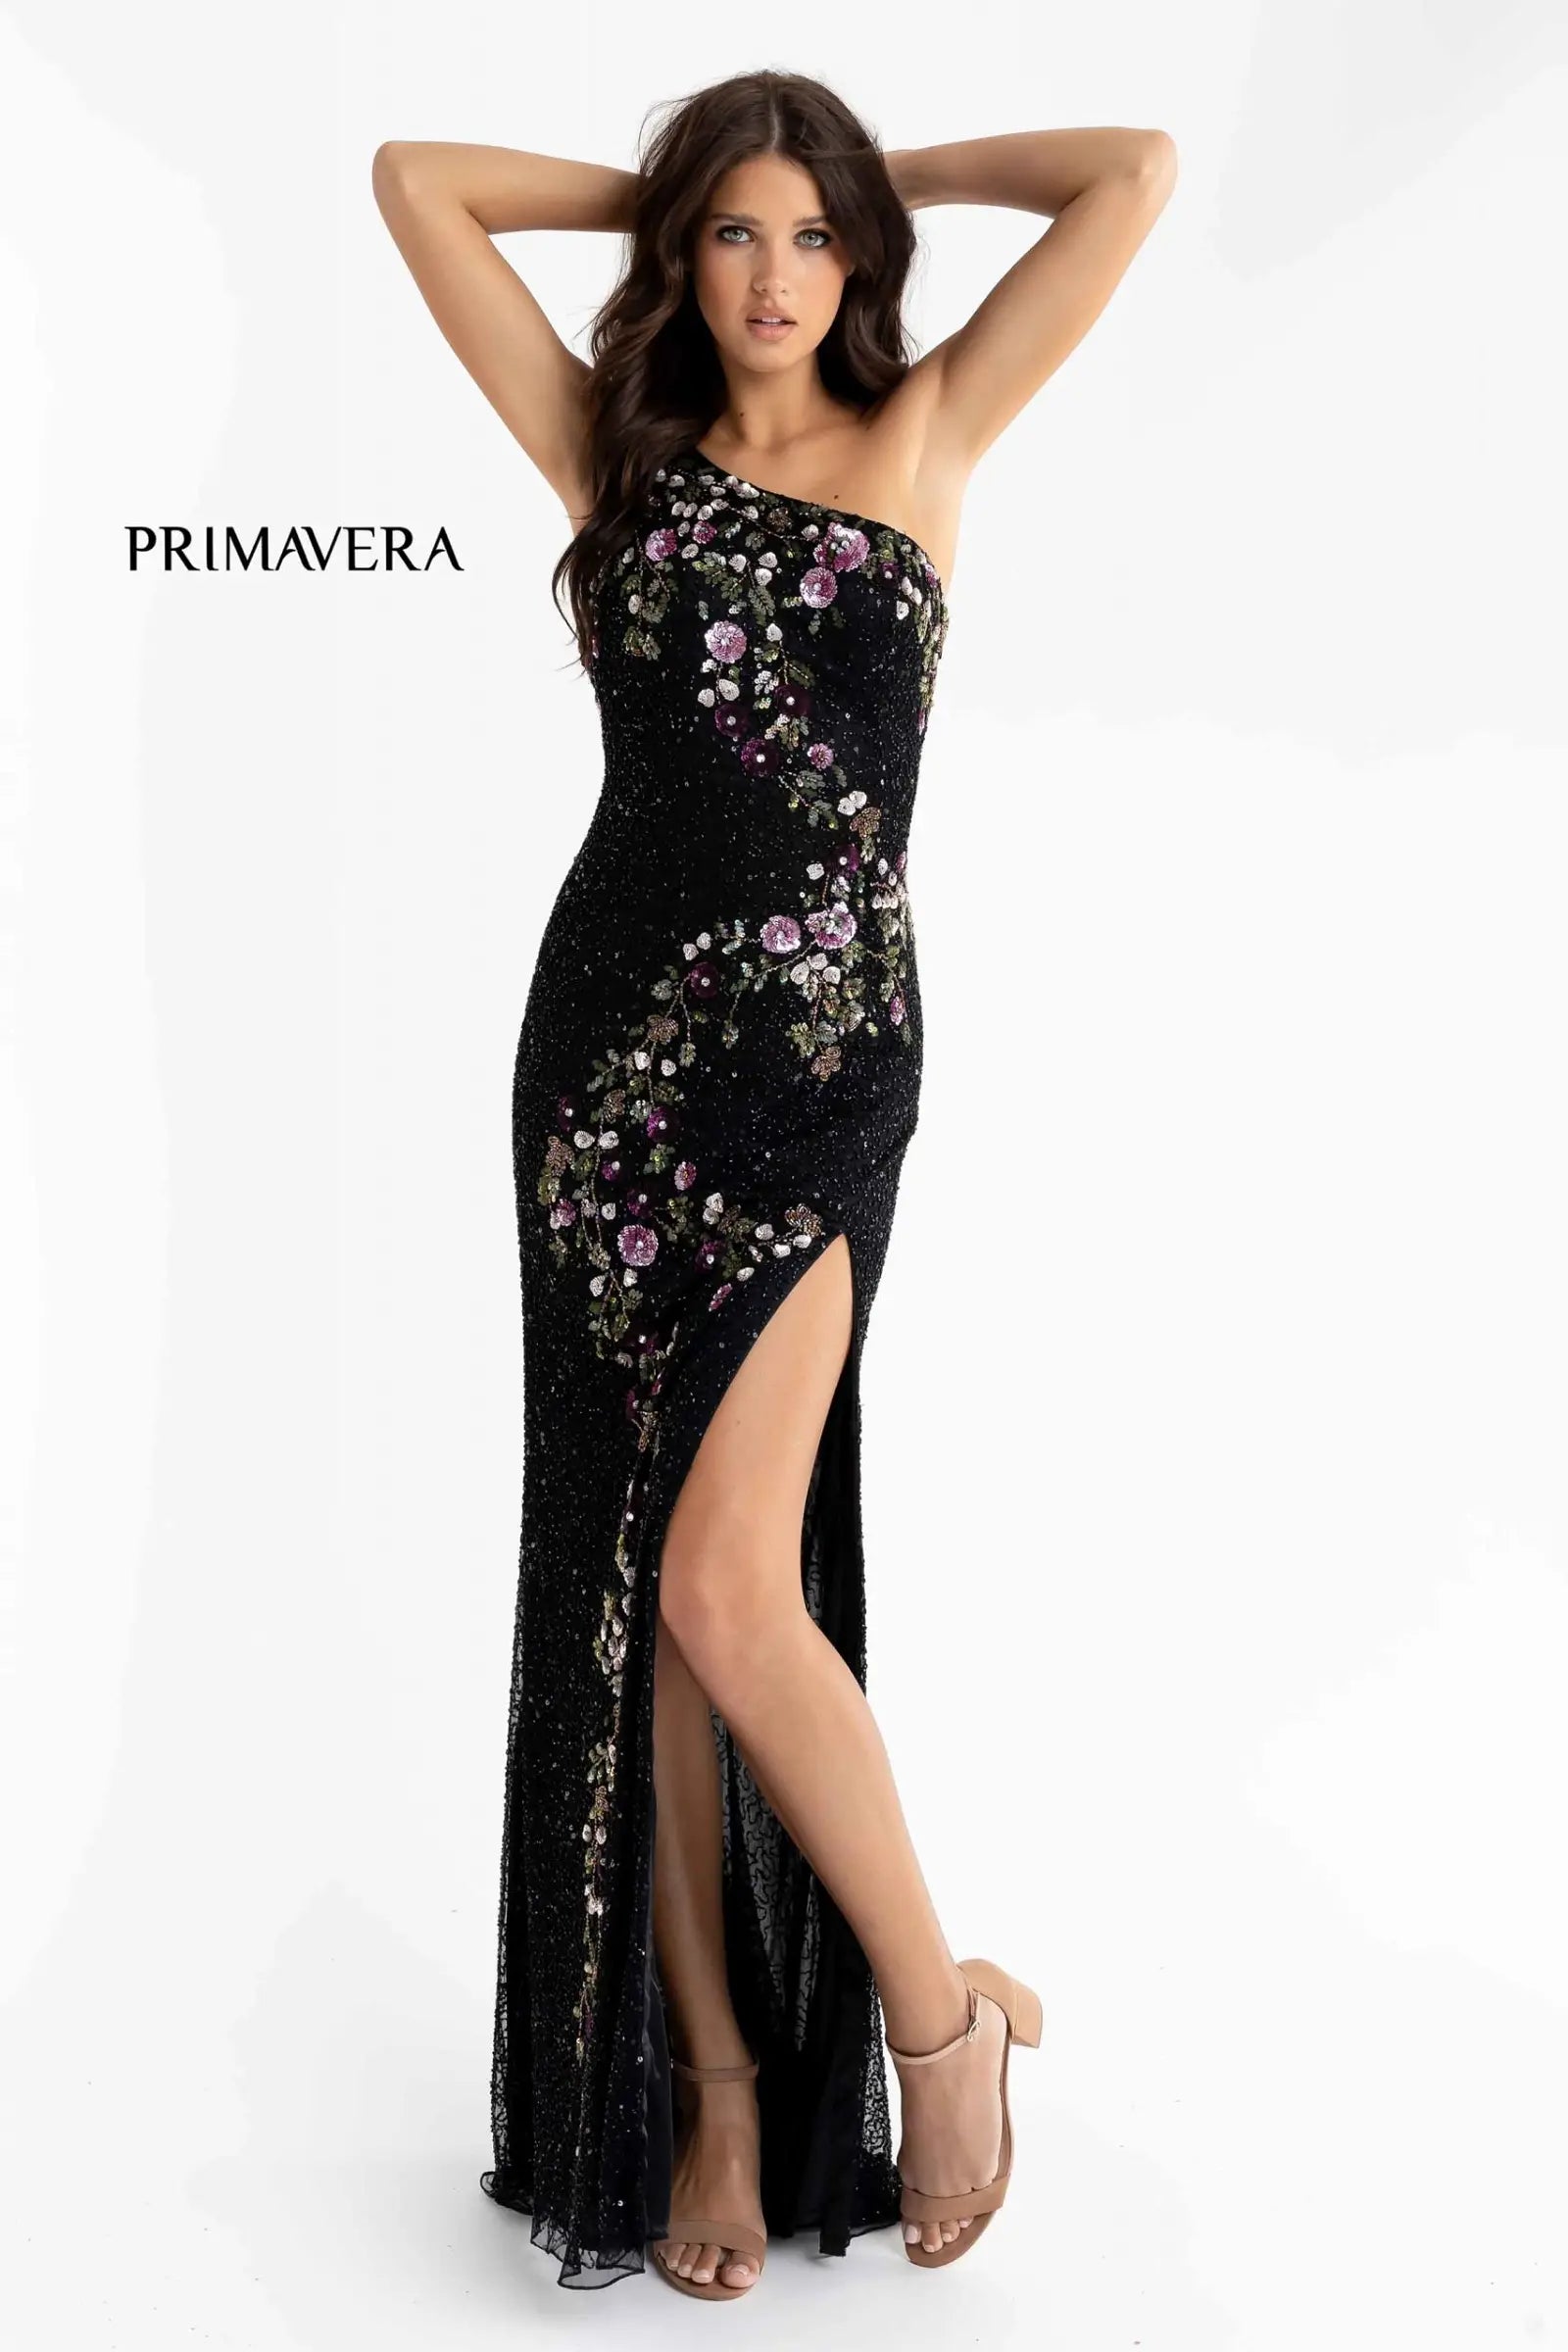 Primavera Couture 3928 Prom Dress Long Beaded One shoulder Gown. This dress has a beautiful design. This Gown has a beautiful design going on with the flowers. 